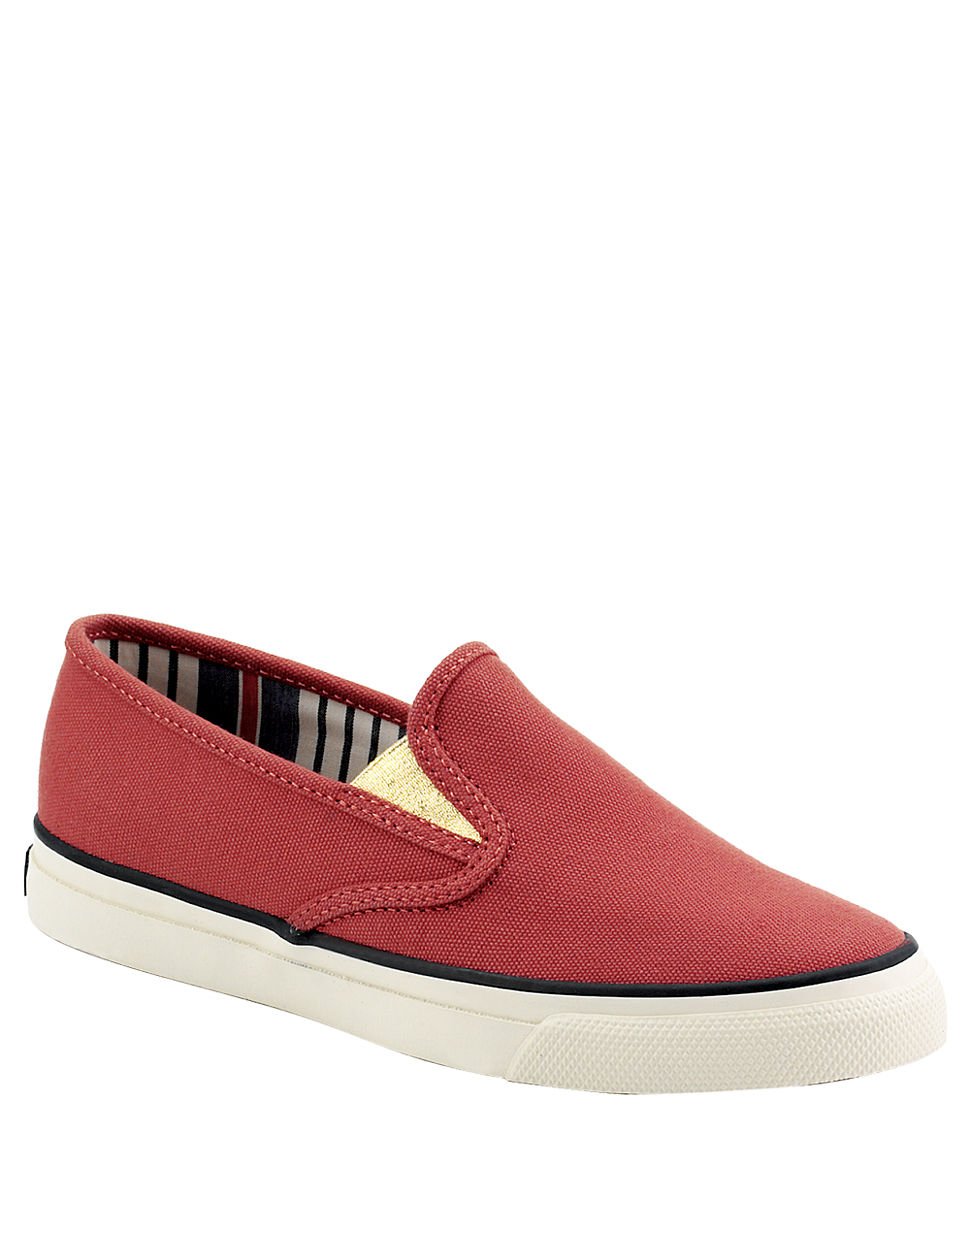 Sperry Top-sider Mariner Canvas Double Gore Slipon Sneakers in Red | Lyst